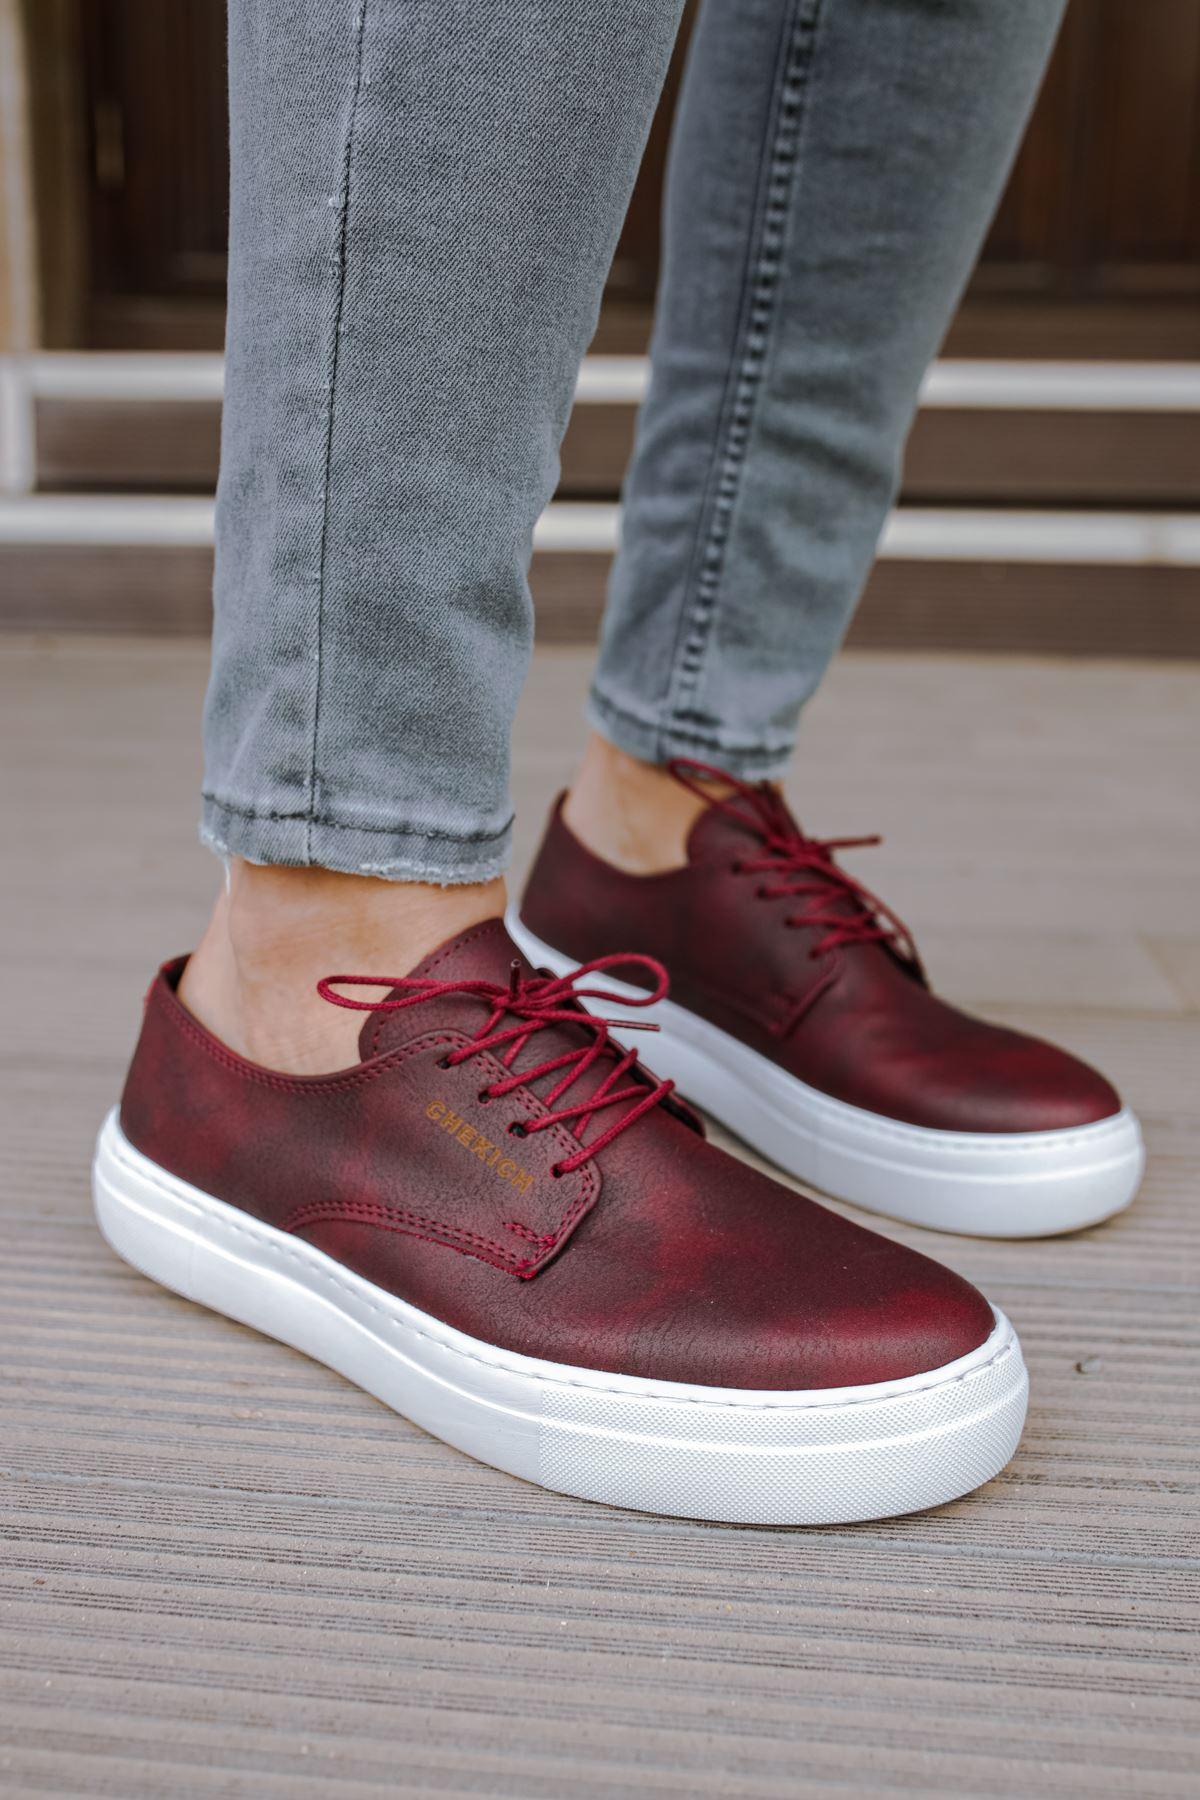 CH005 BT Men's Burgundy-White Sole Pneumatic Leather-Orthopedics Casual Sneaker Sports Shoes - STREET MODE ™